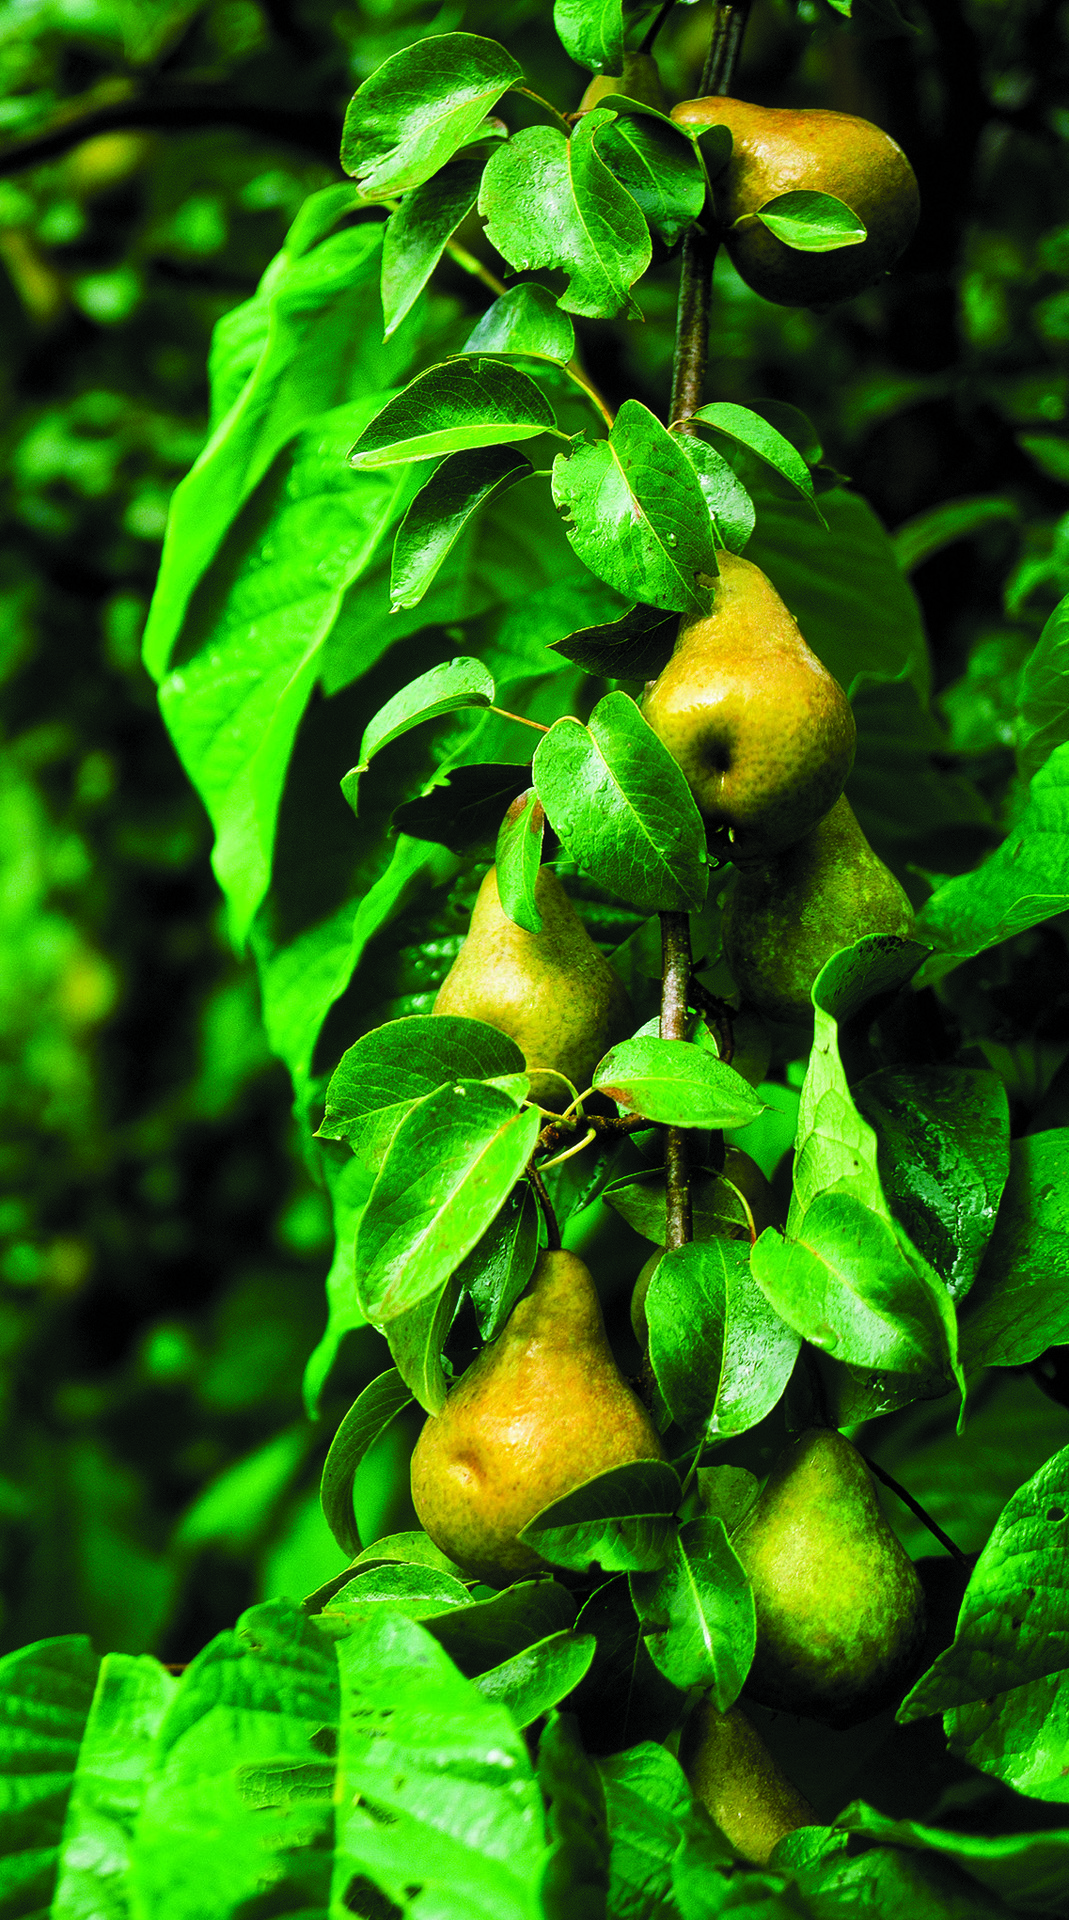 From the Certified Organic project. Pears are one of the only fruits that must be picked unripe and are allowed to ripen off the tree.